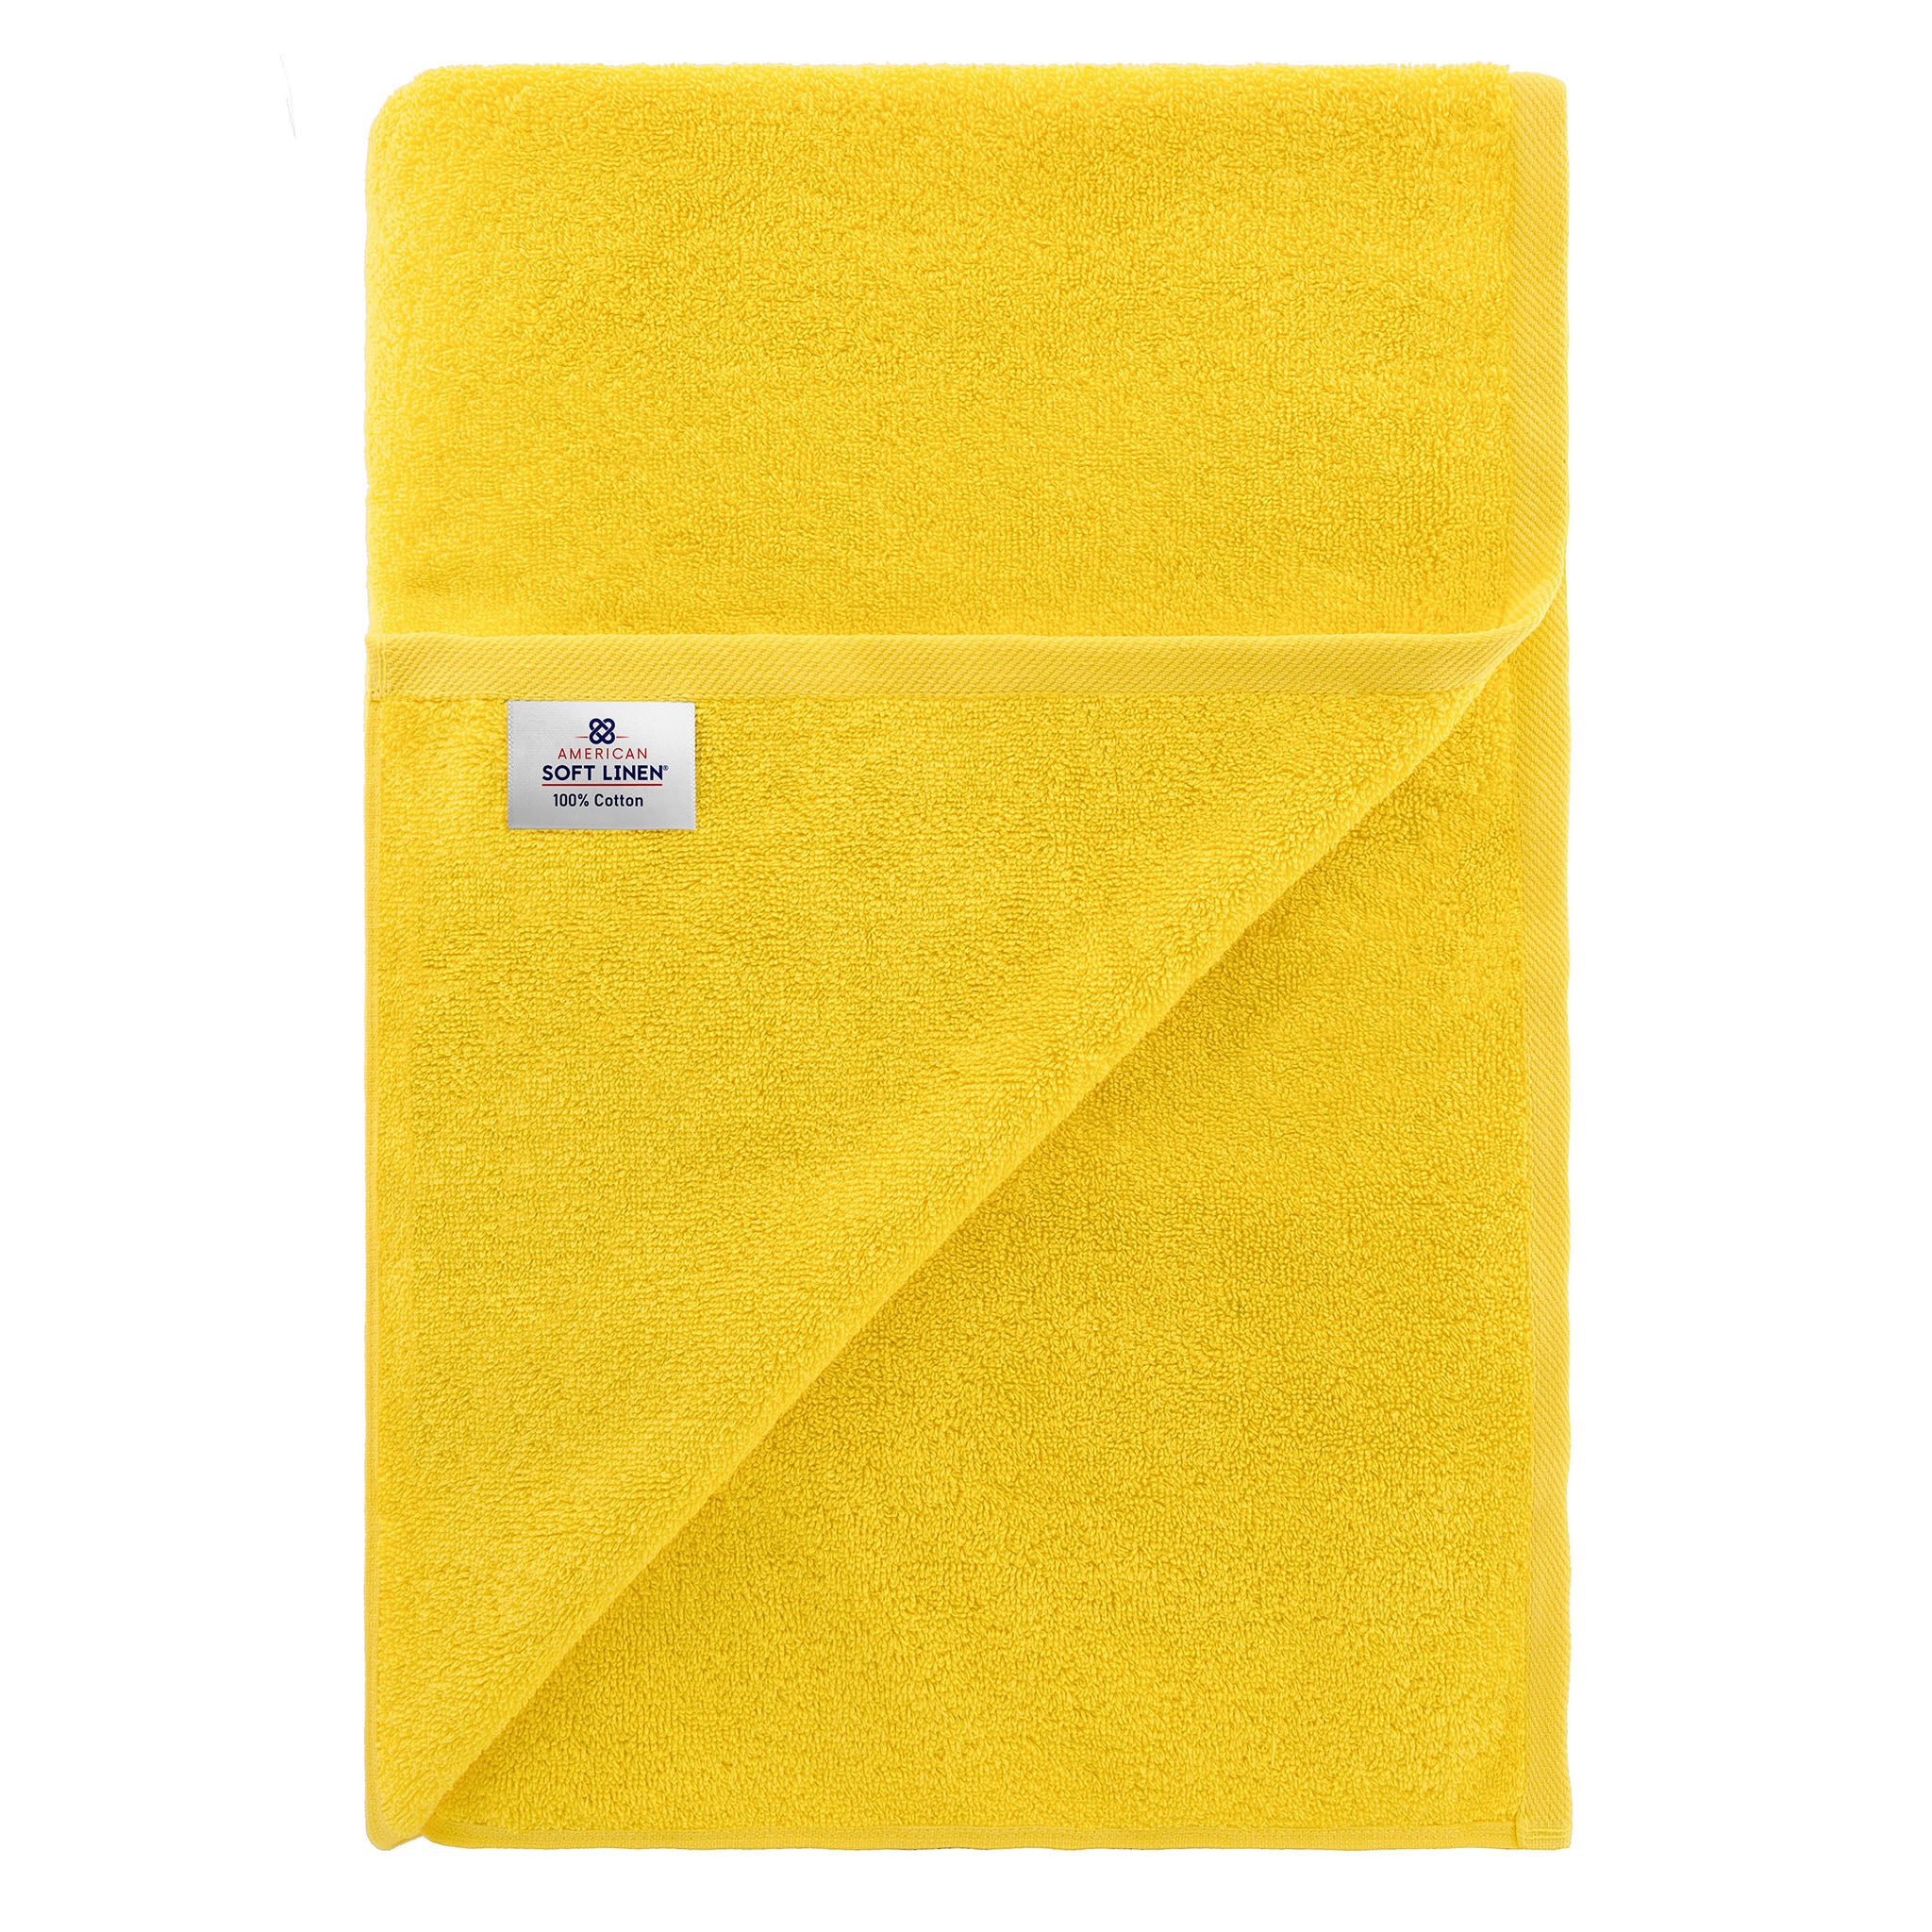 American Soft Linen 100% Ring Spun Cotton 40x80 Inches Oversized Bath Sheets yellow-7